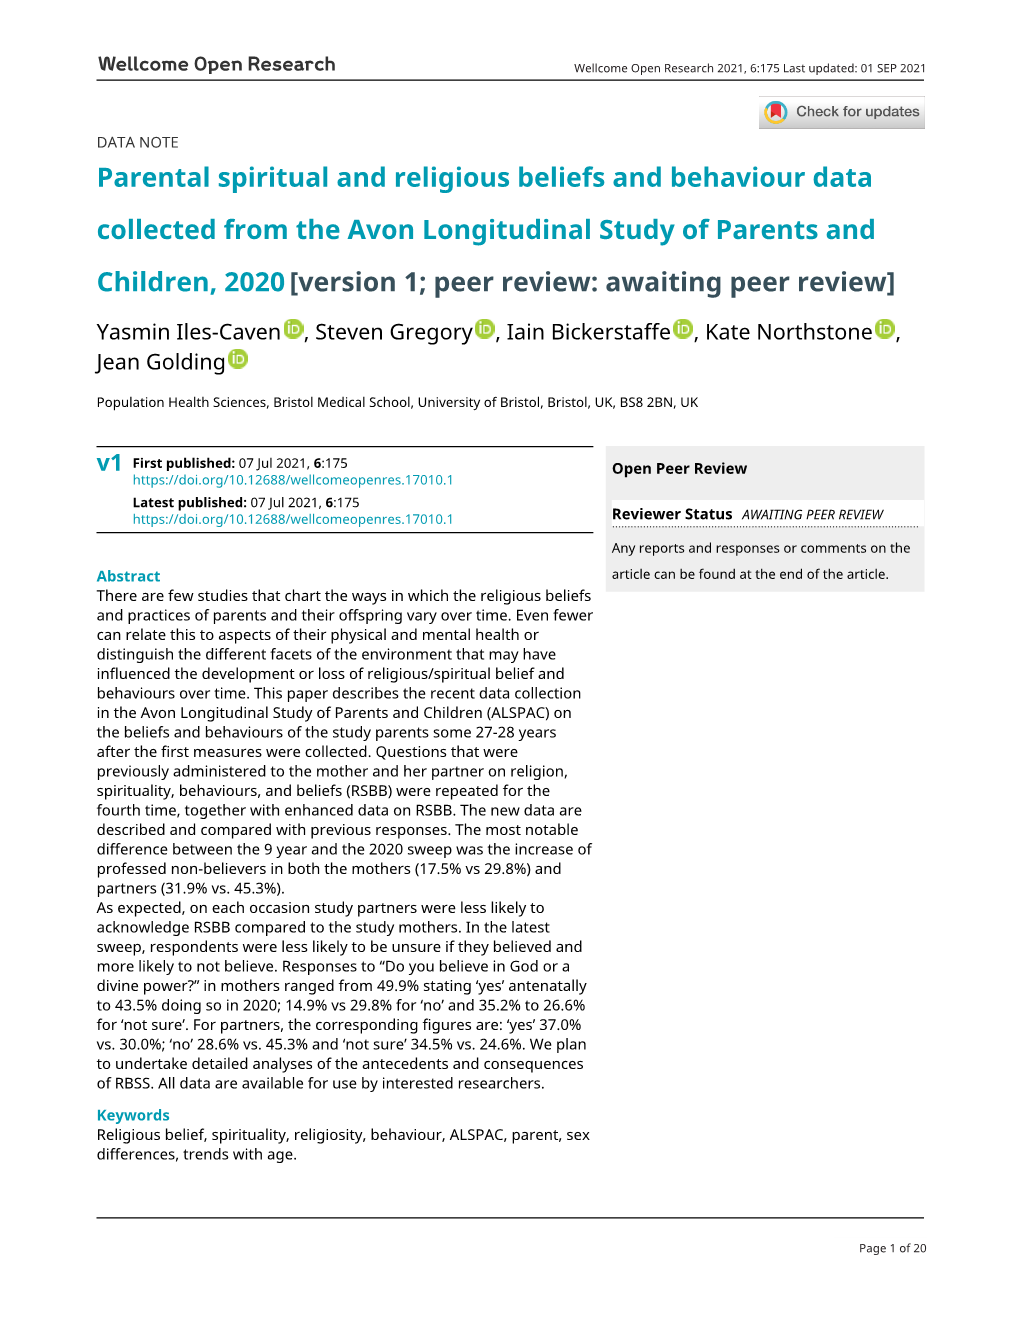 Parental Spiritual and Religious Beliefs and Behaviour Data Collected from the Avon Longitudinal Study of Parents and Children